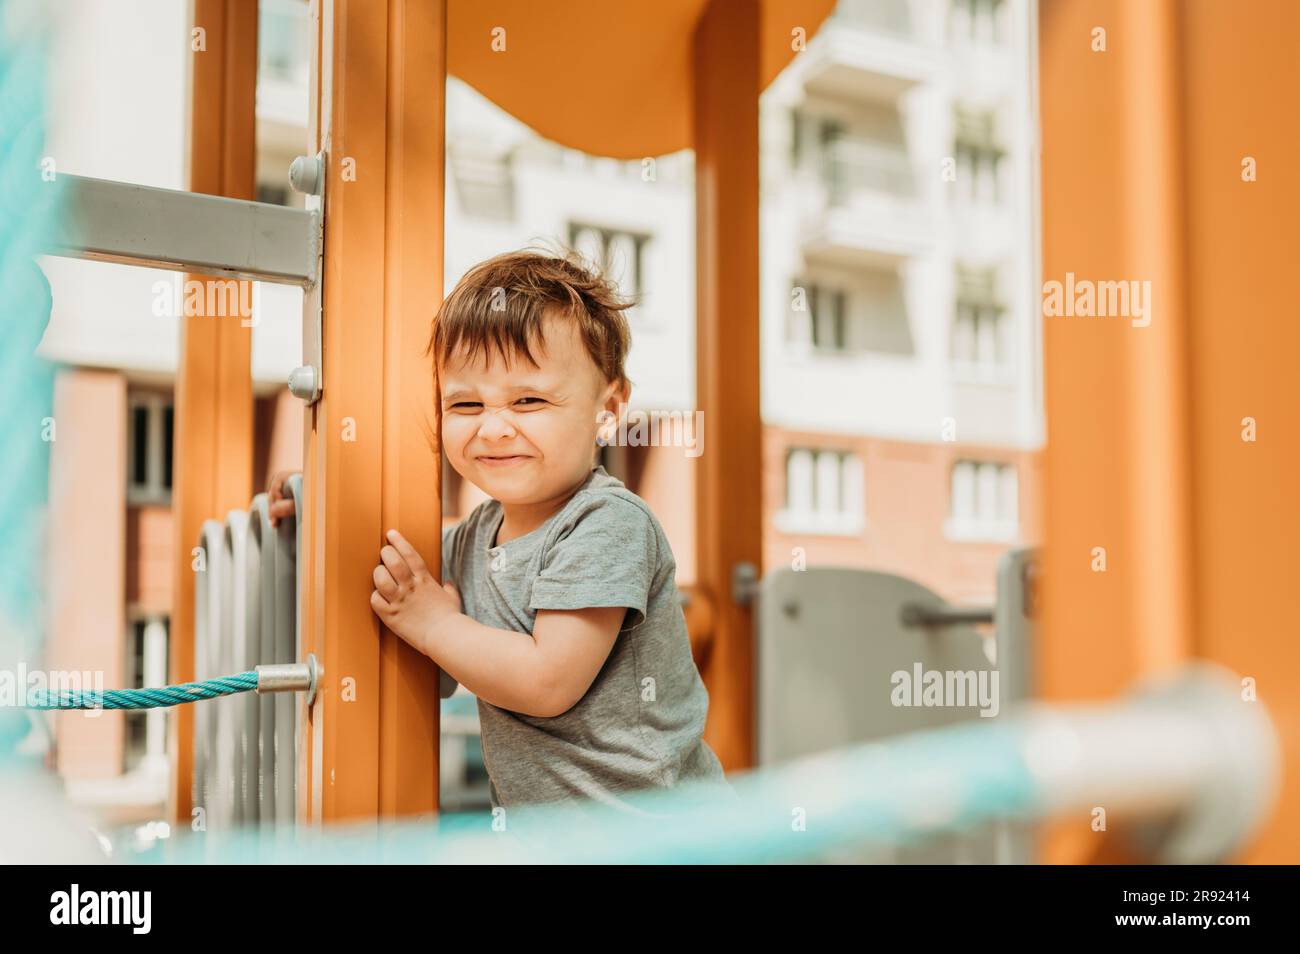 Smiling boy standing on playing equipment at playground Stock Photo